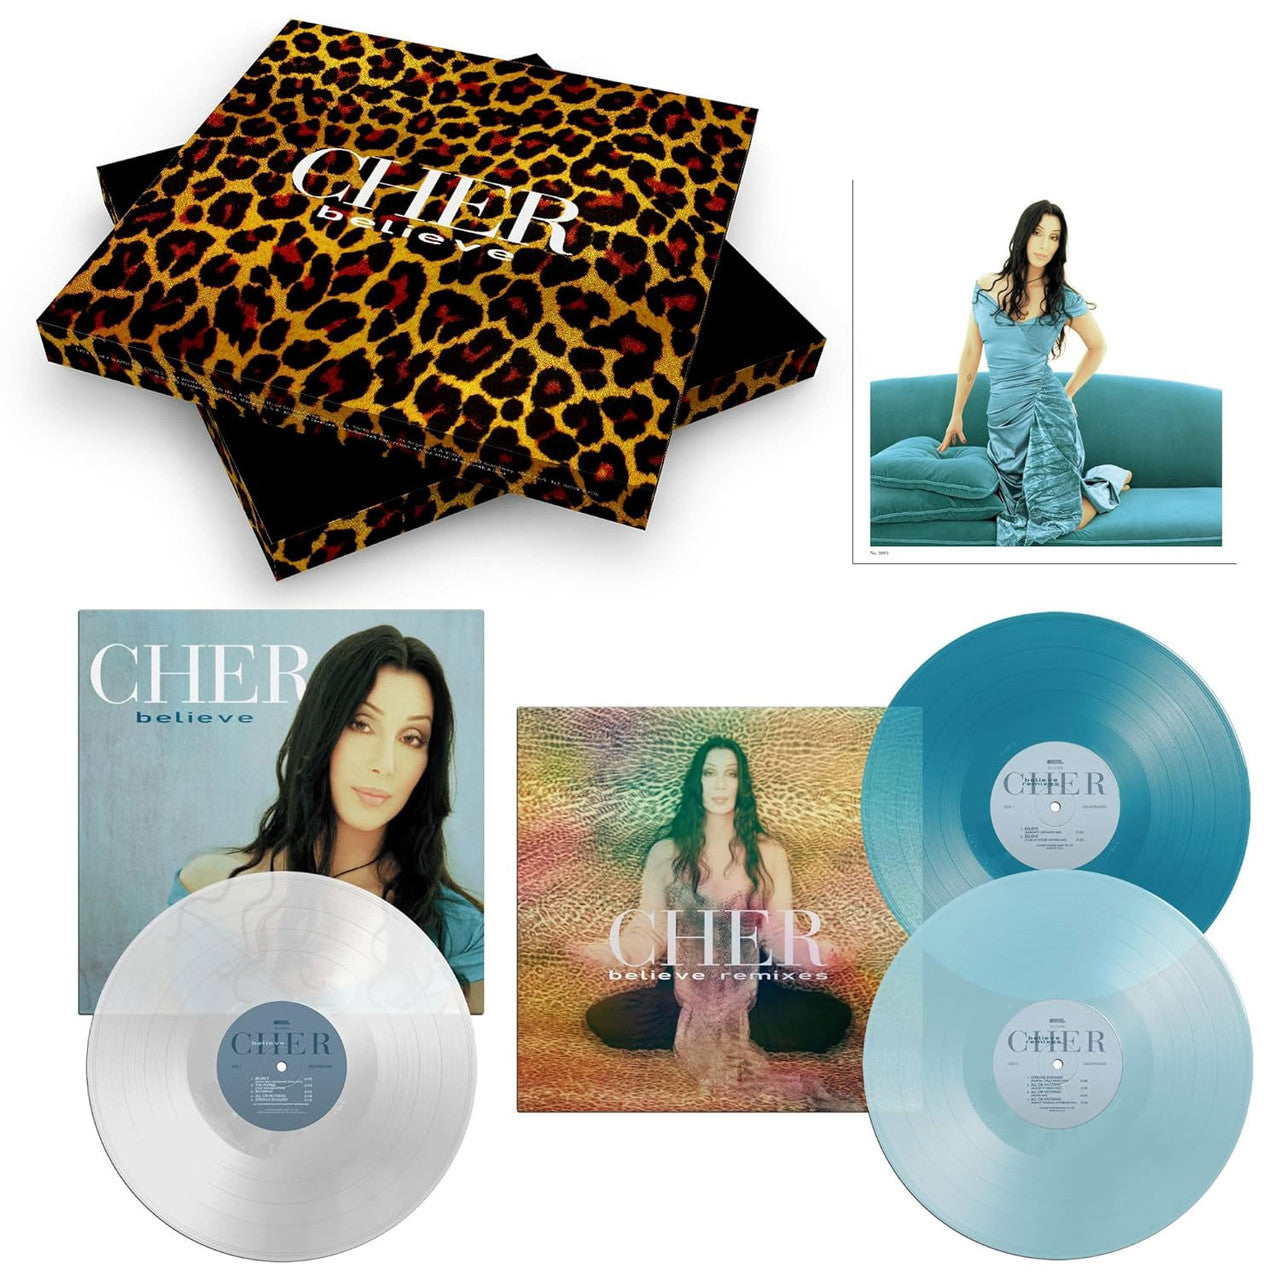 Cher - Believe [3LP] (Clear, Sea Blue & Light Blue Vinyl, 25th Anniversary Deluxe Edition, exclusive numbered lithograph, remastered remixes, limited)